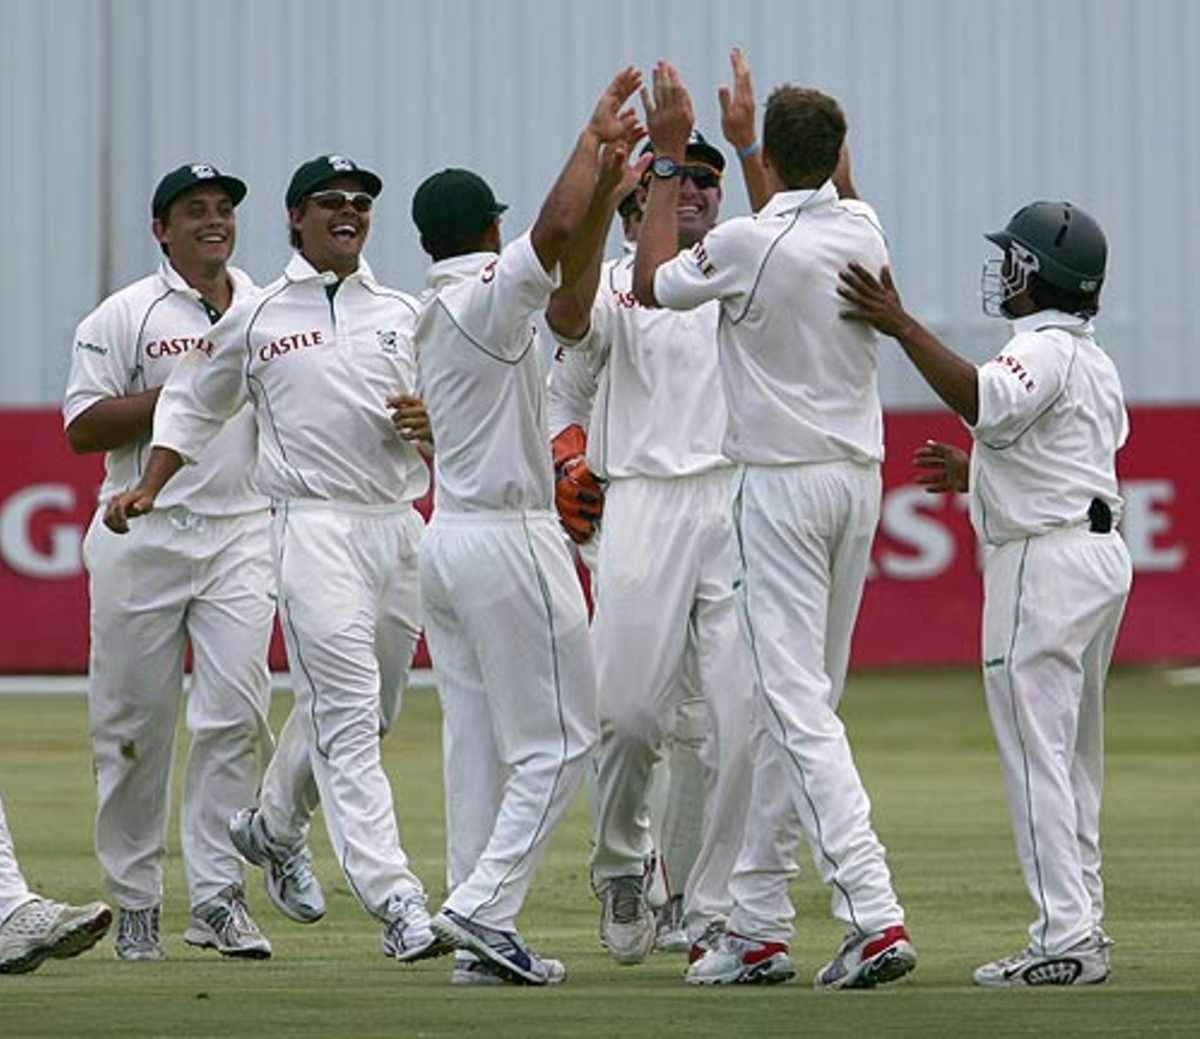 Rest of South Africa celebrate one of their early strikes, Rest of South Africa v Indians, Potchefstroom, 1st day, December 7, 2006